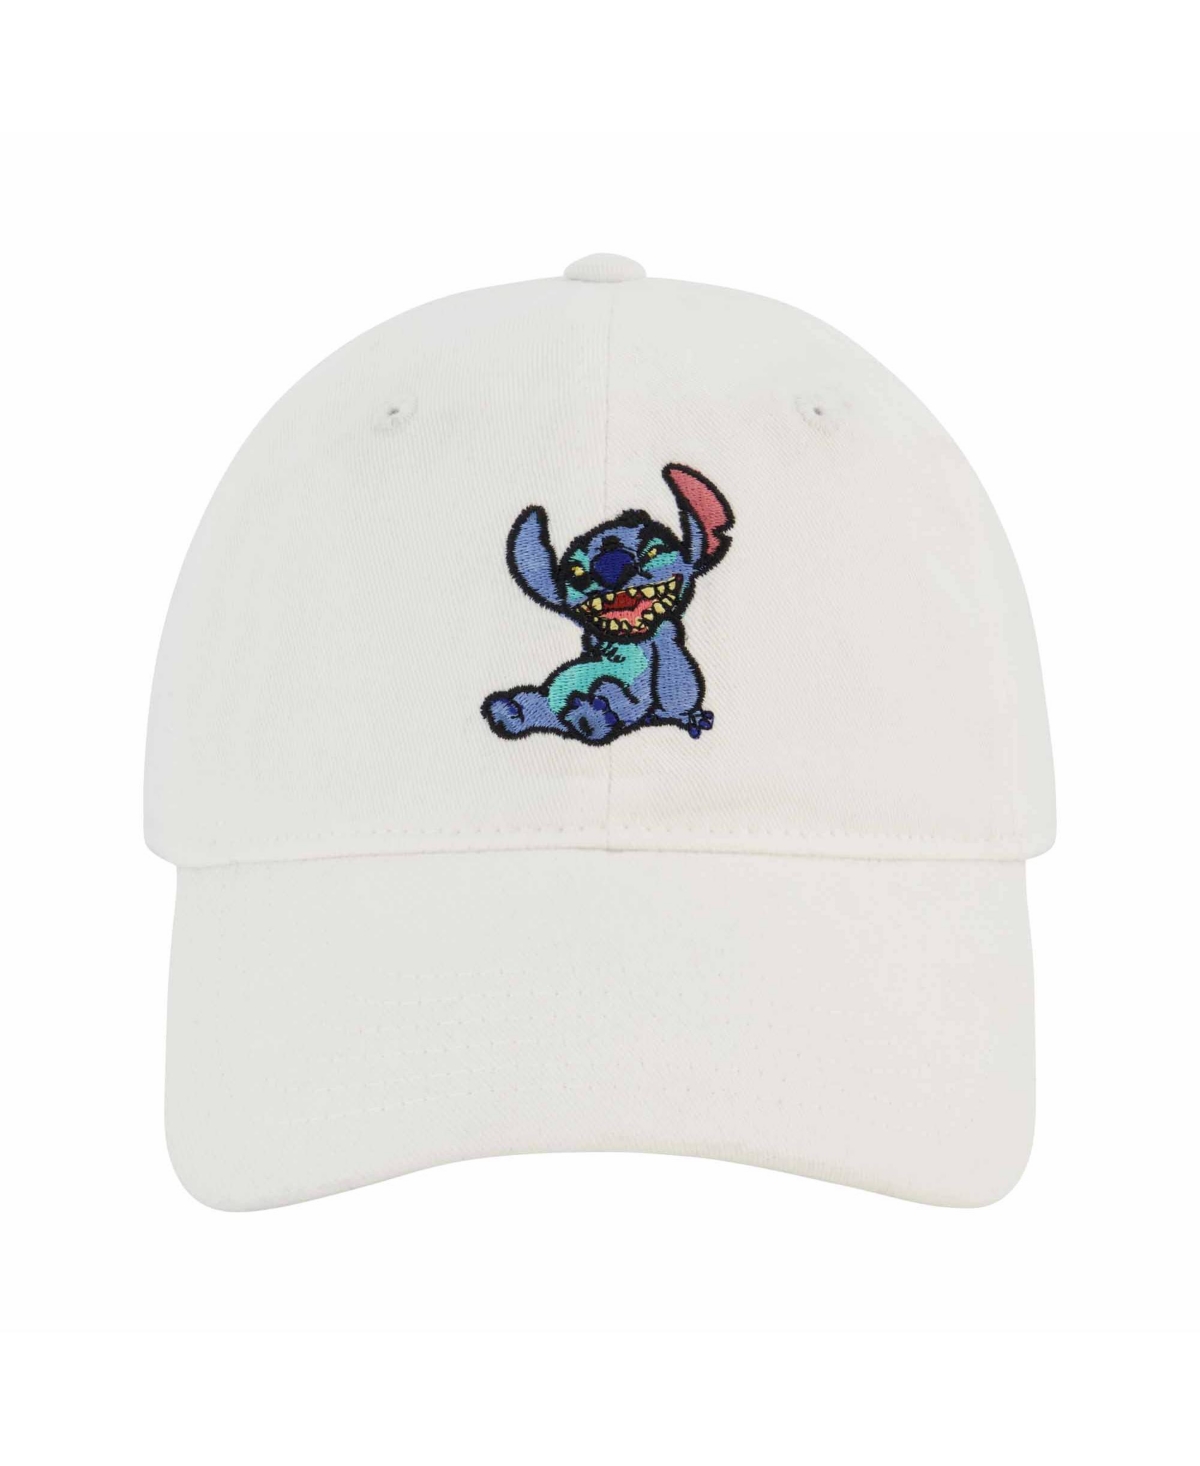 Disney's Lilo and Stitch Adjustable Baseball Hat with Curved Brim - White